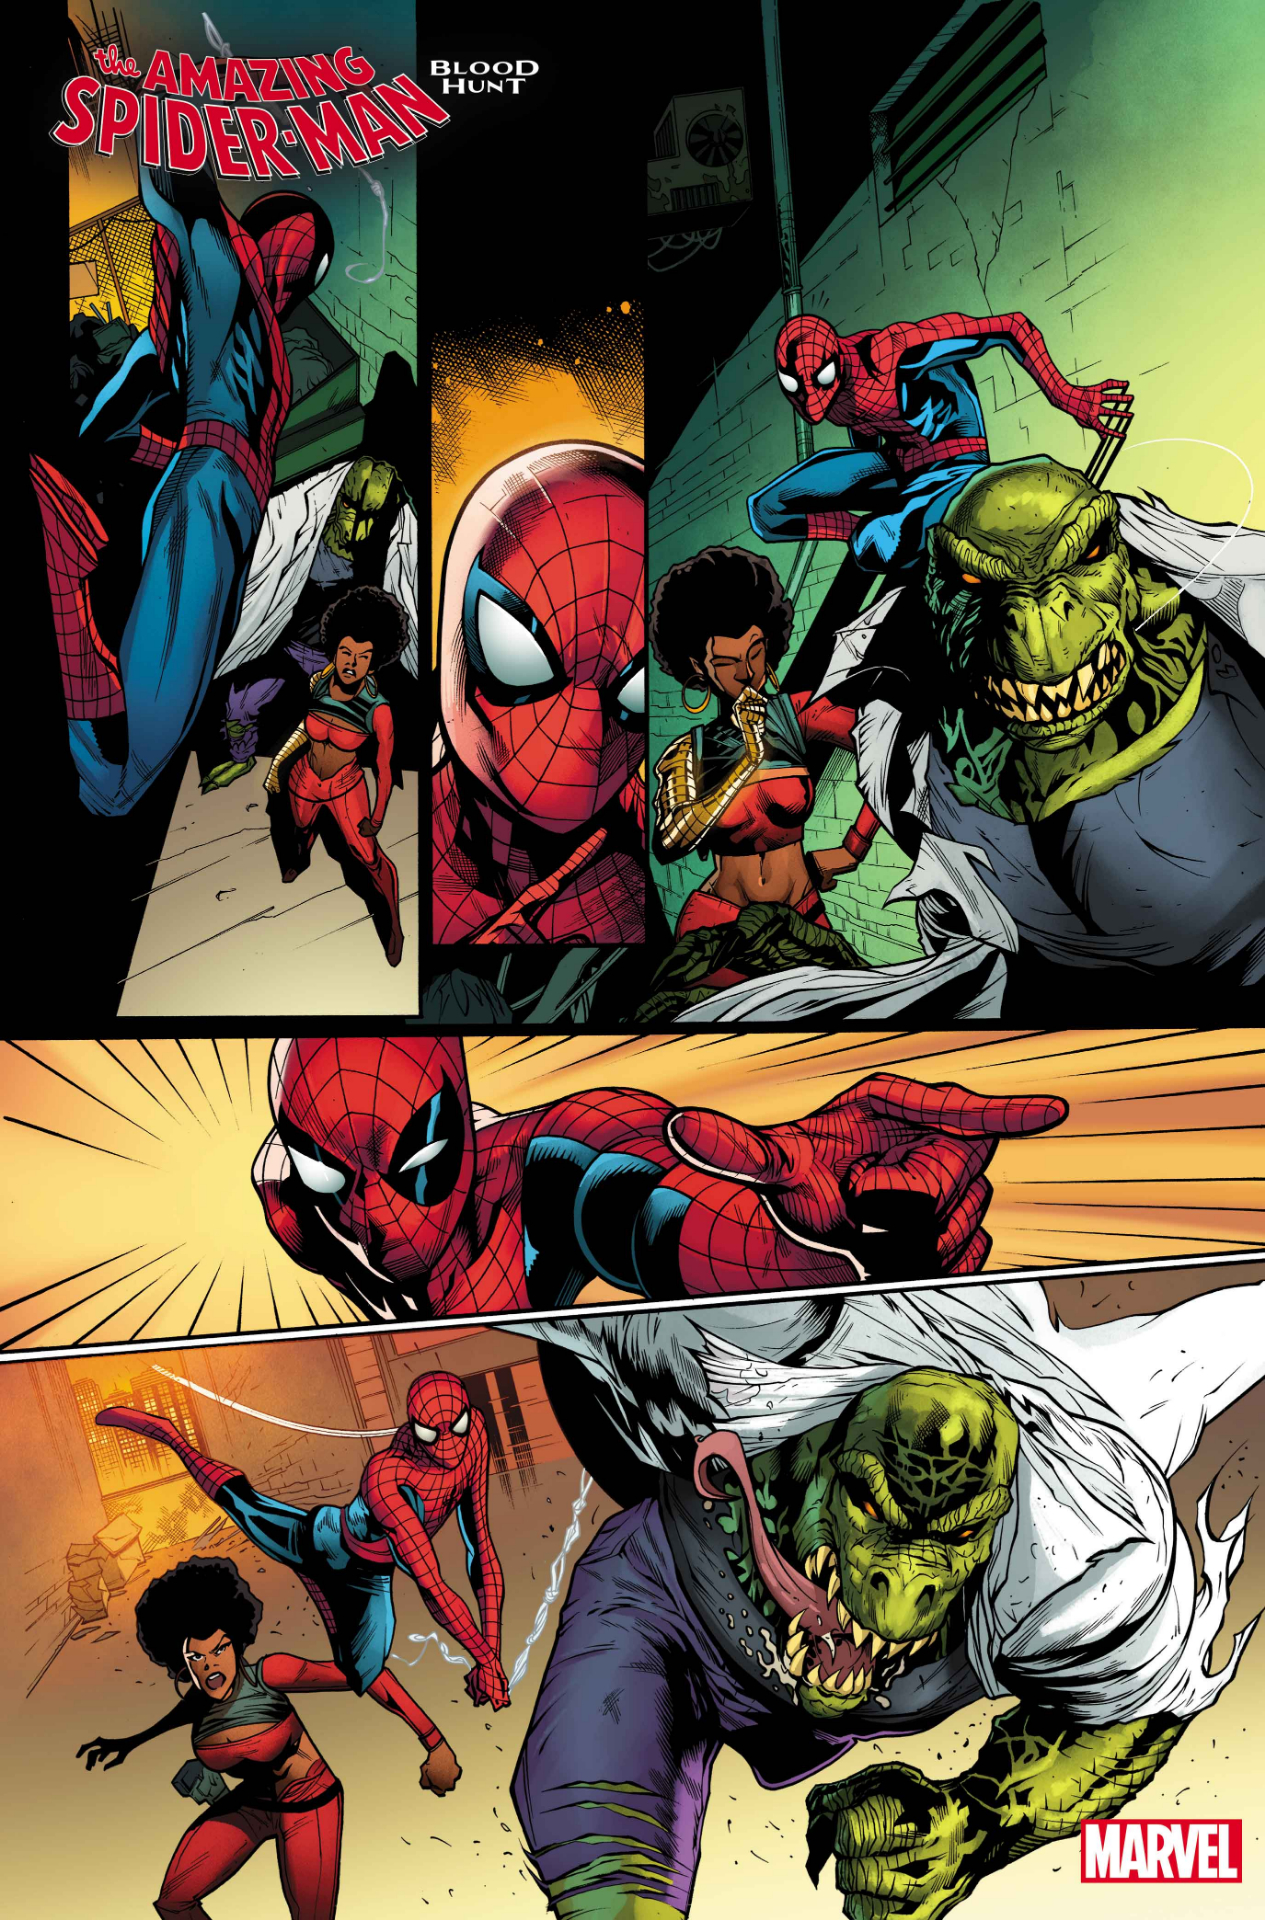 Amazing Spider-Man : Chasse au sang #1